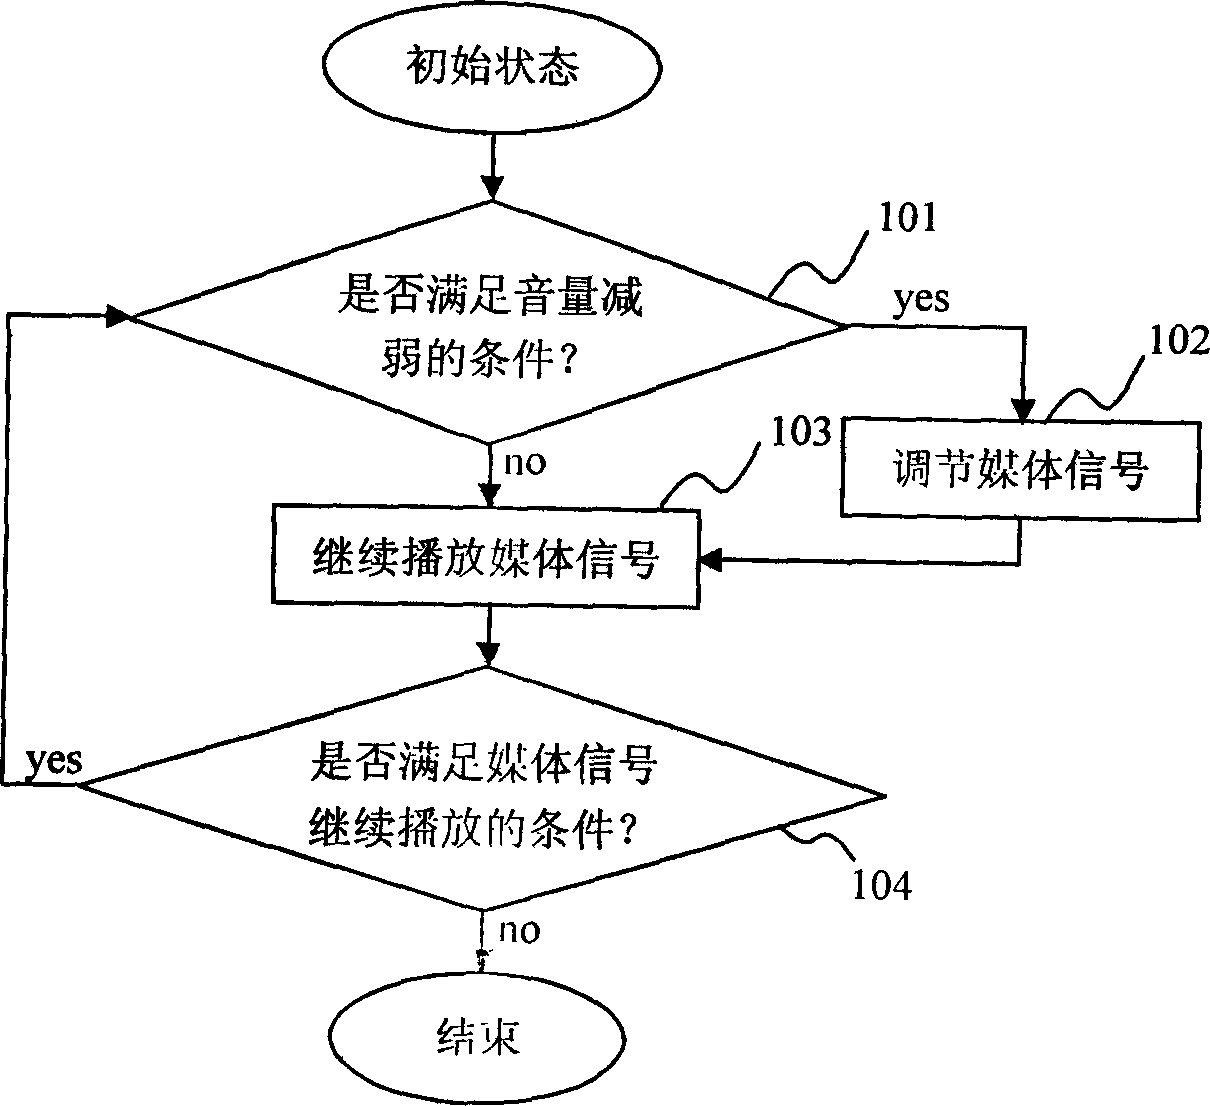 Method for protecting hearing by adjusting volume based on medium player